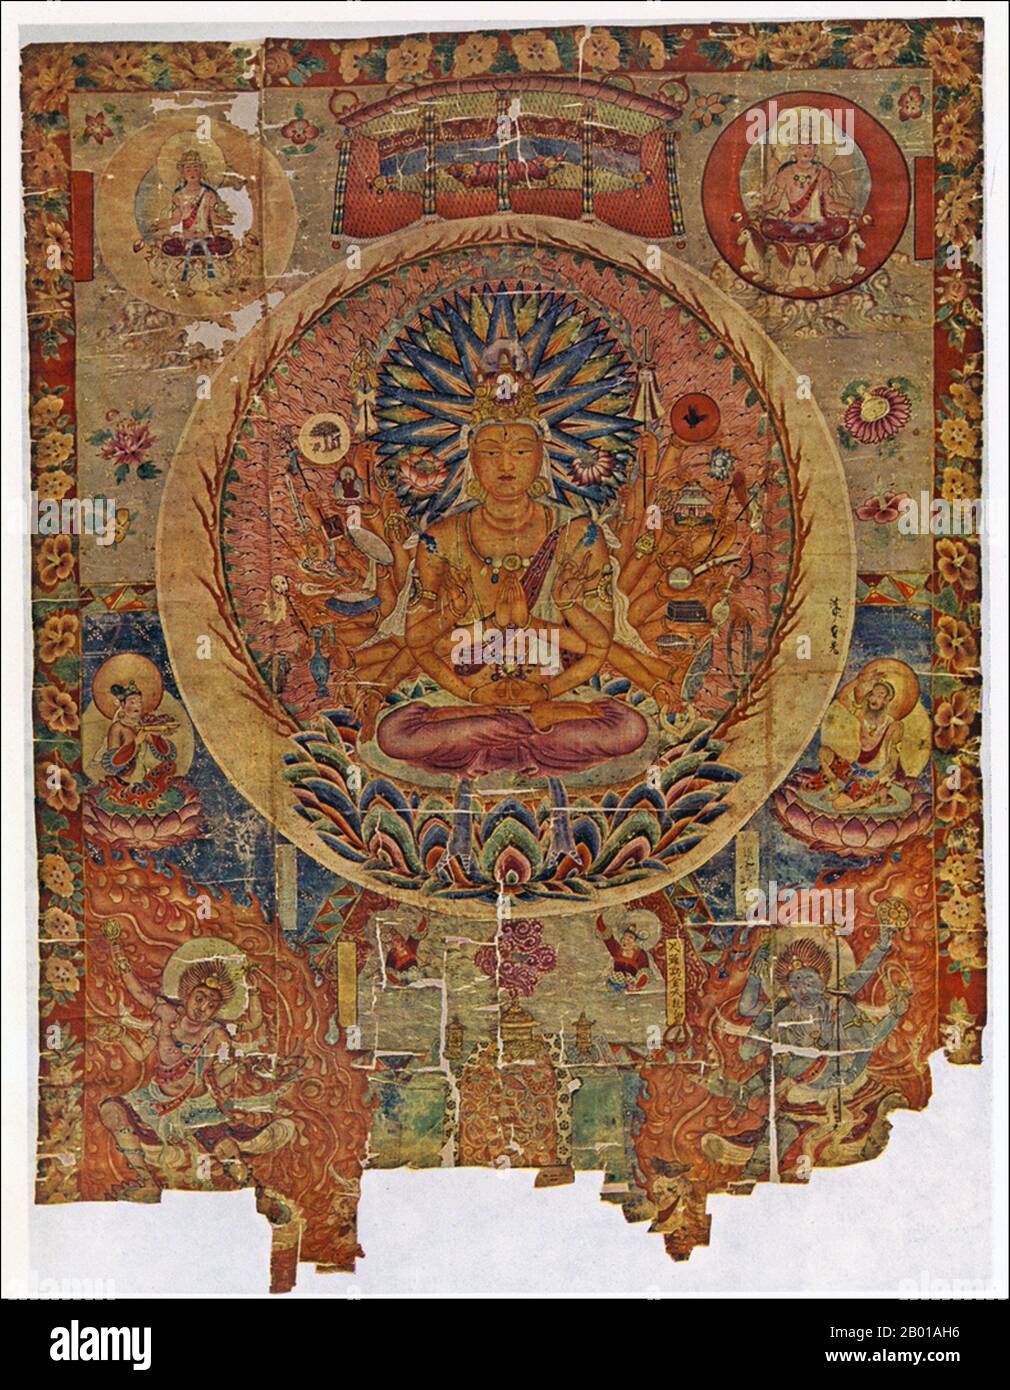 China: Painting on silk representing thousand-armed Avalokitesvara or Guanyin, Mogao Caves, Dunhuang, Gansu, c. 9th century.  Avalokitesvara ('Lord who looks down') is a bodhisattva who embodies the compassion of all Buddhas. He is one of the more widely revered bodhisattvas in mainstream Mahayana Buddhism.  The Mogao Caves, or Mogao Grottoes (also known as the Caves of the Thousand Buddhas and Dunhuang Caves) form a system of 492 temples 25 km (15.5 miles) southeast of the center of Dunhuang, an oasis strategically located at a religious and cultural crossroads on the Silk Road. Stock Photo